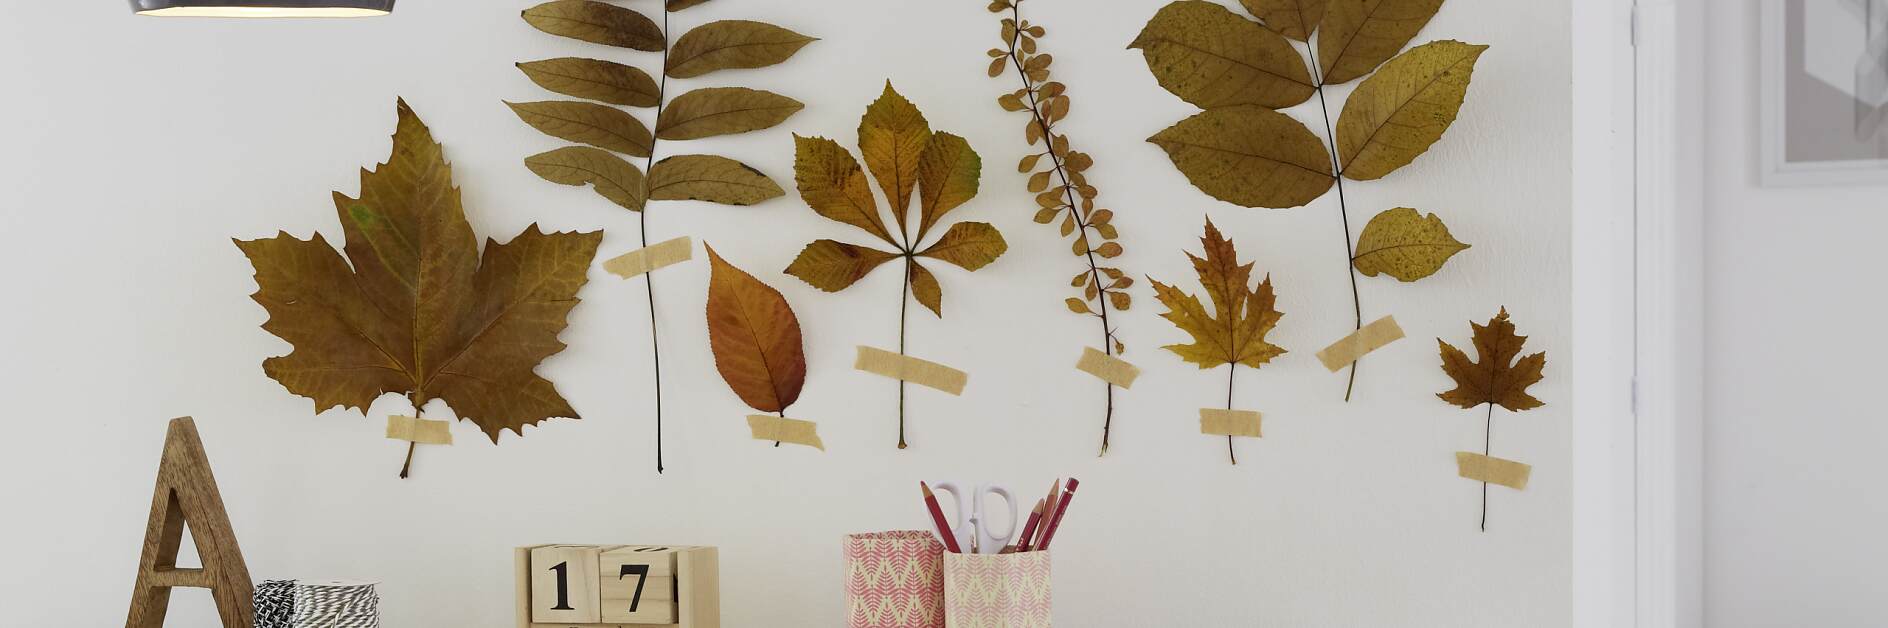 Autumn Leaves on the Wall - How We Do It